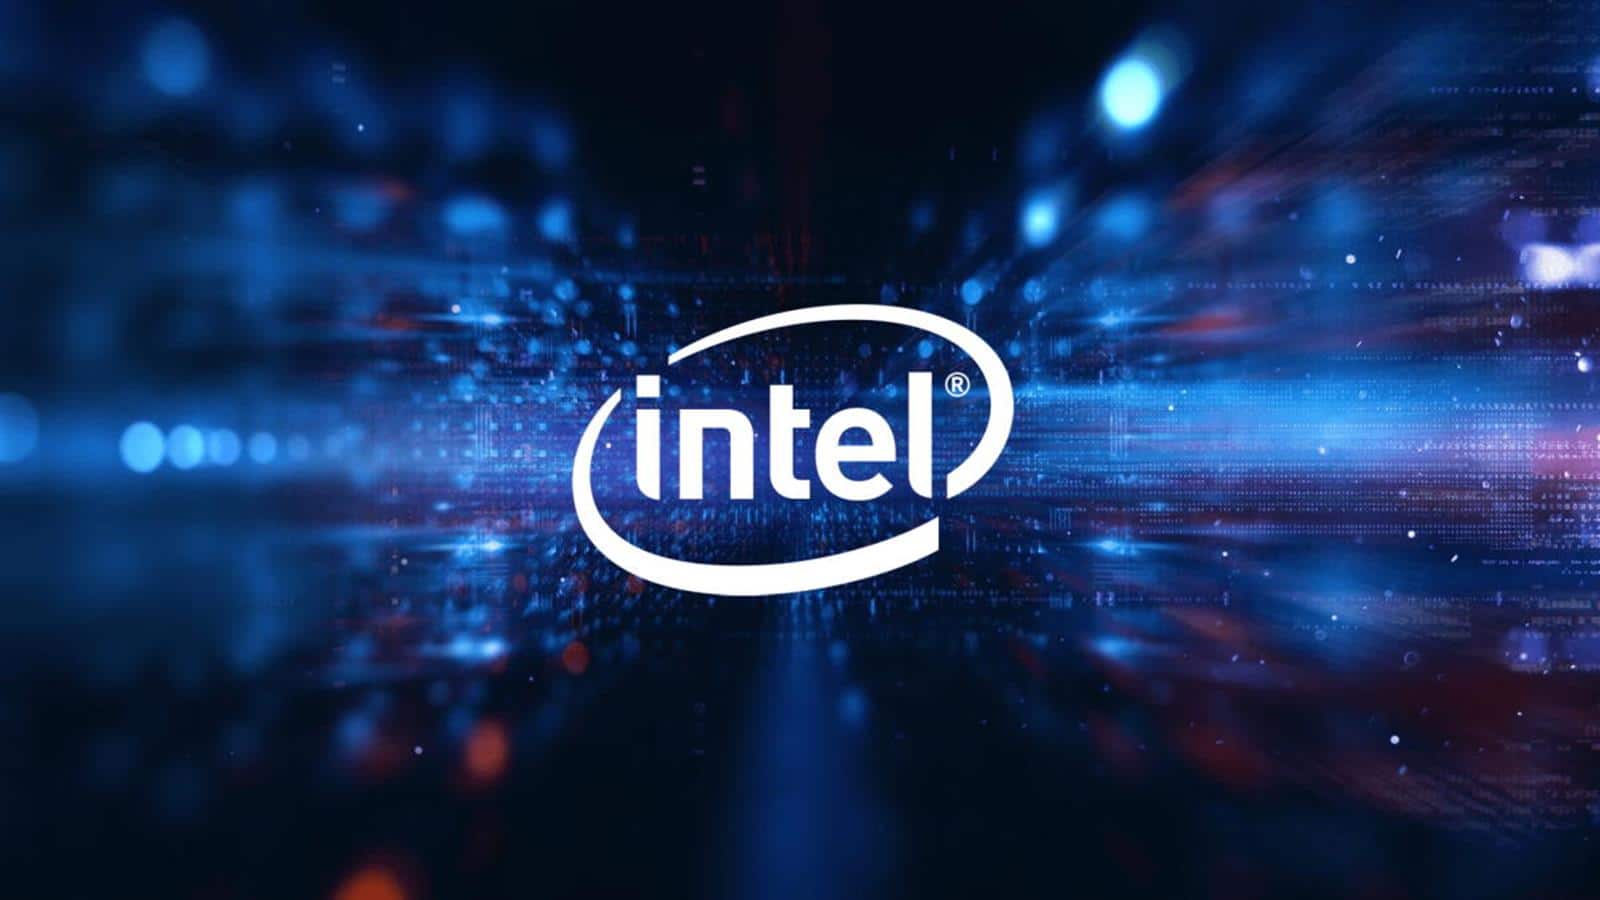 Intel blocks first and then apologizes, which is another scandal with China